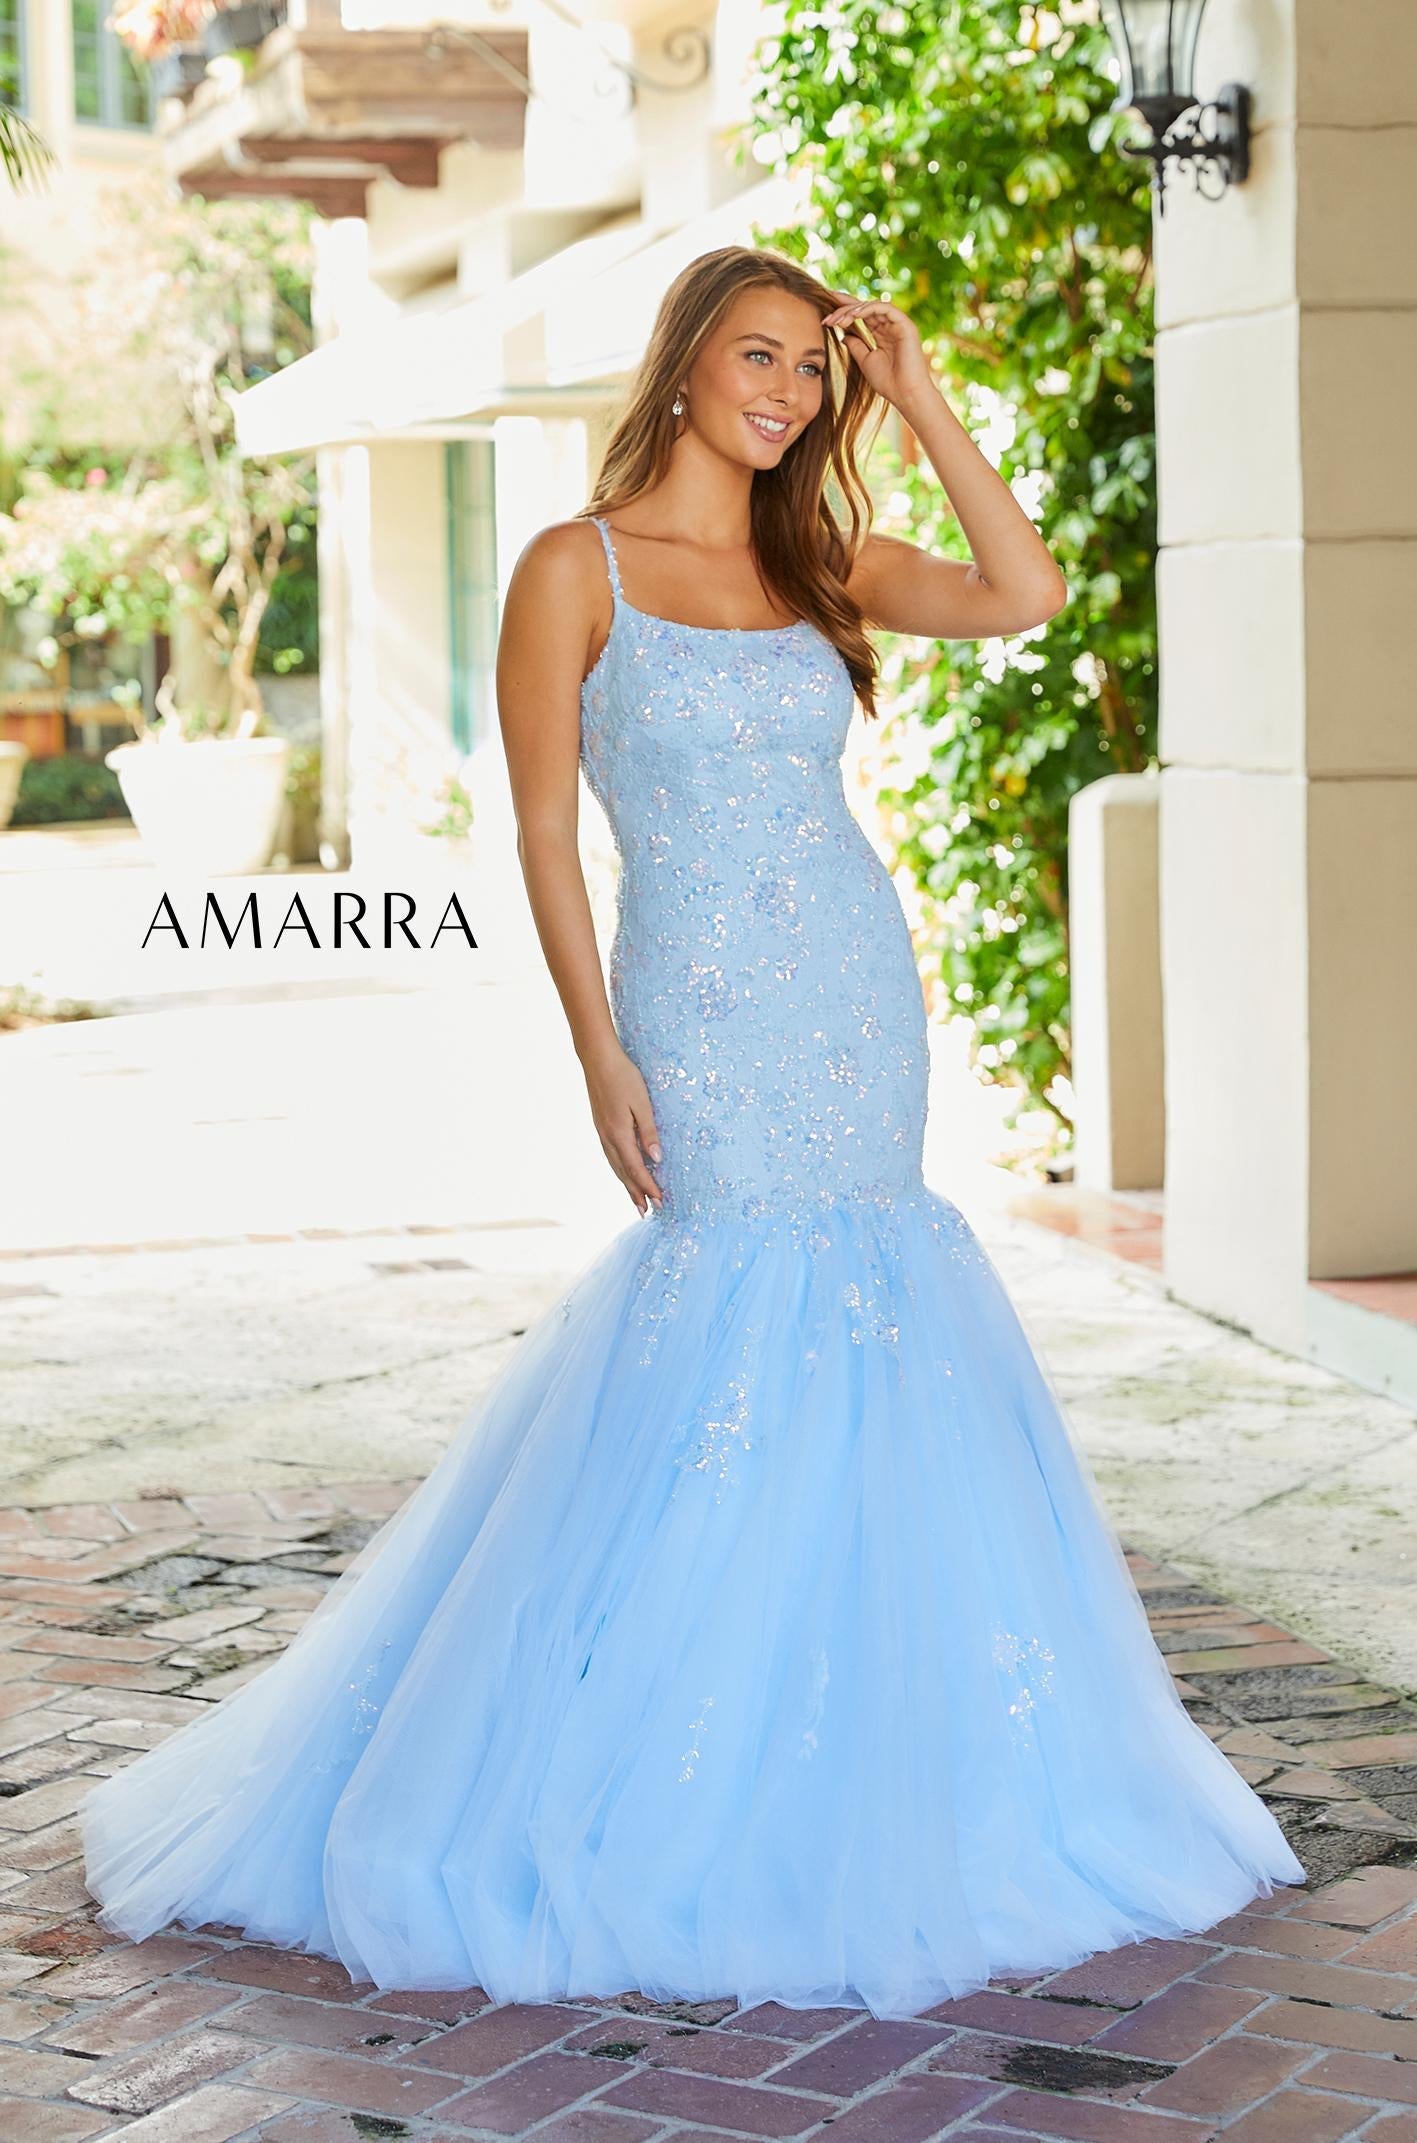 Amarra 87339 Sequin Embellished Tulle Mermaid Prom Dress Backless Corset Lace Gown extreme tulle trumpet skirt with sweeping train.   Available Sizes: 00-16  Available Colors: Light Blue, Lilac, Neon Pink